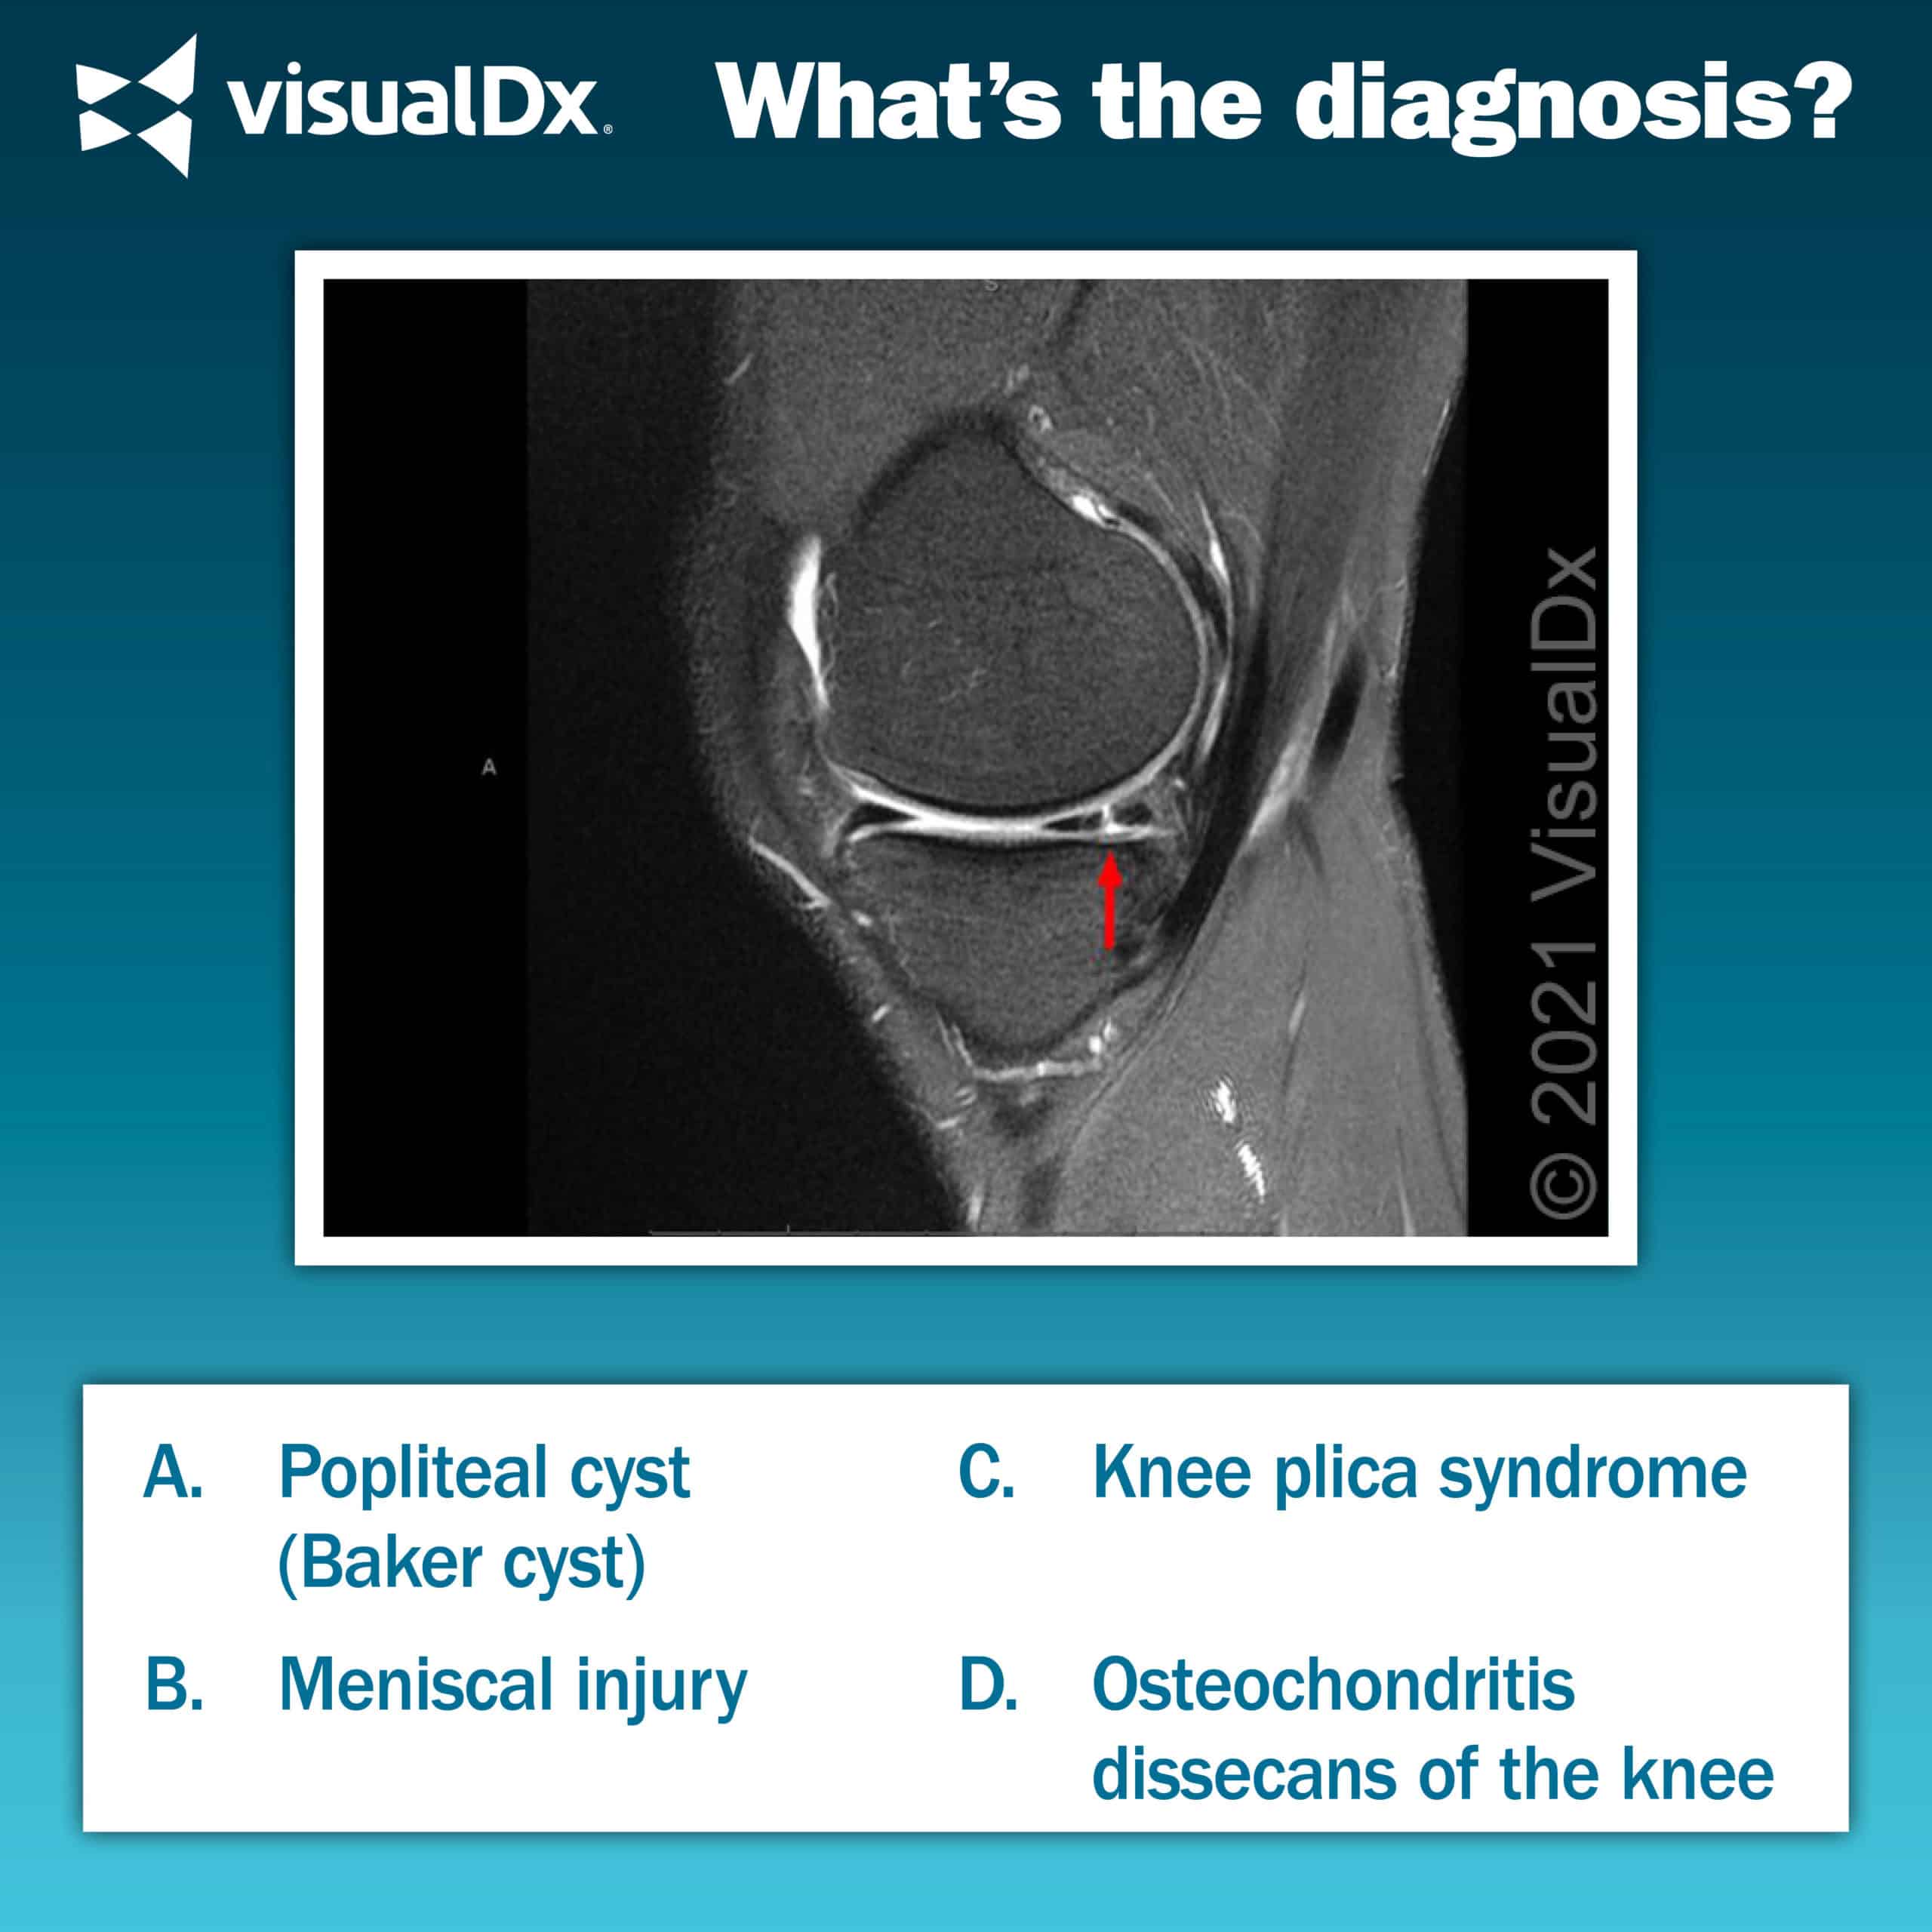 Soccer Player With Knee Pain, Edema – Let’s Diagnose